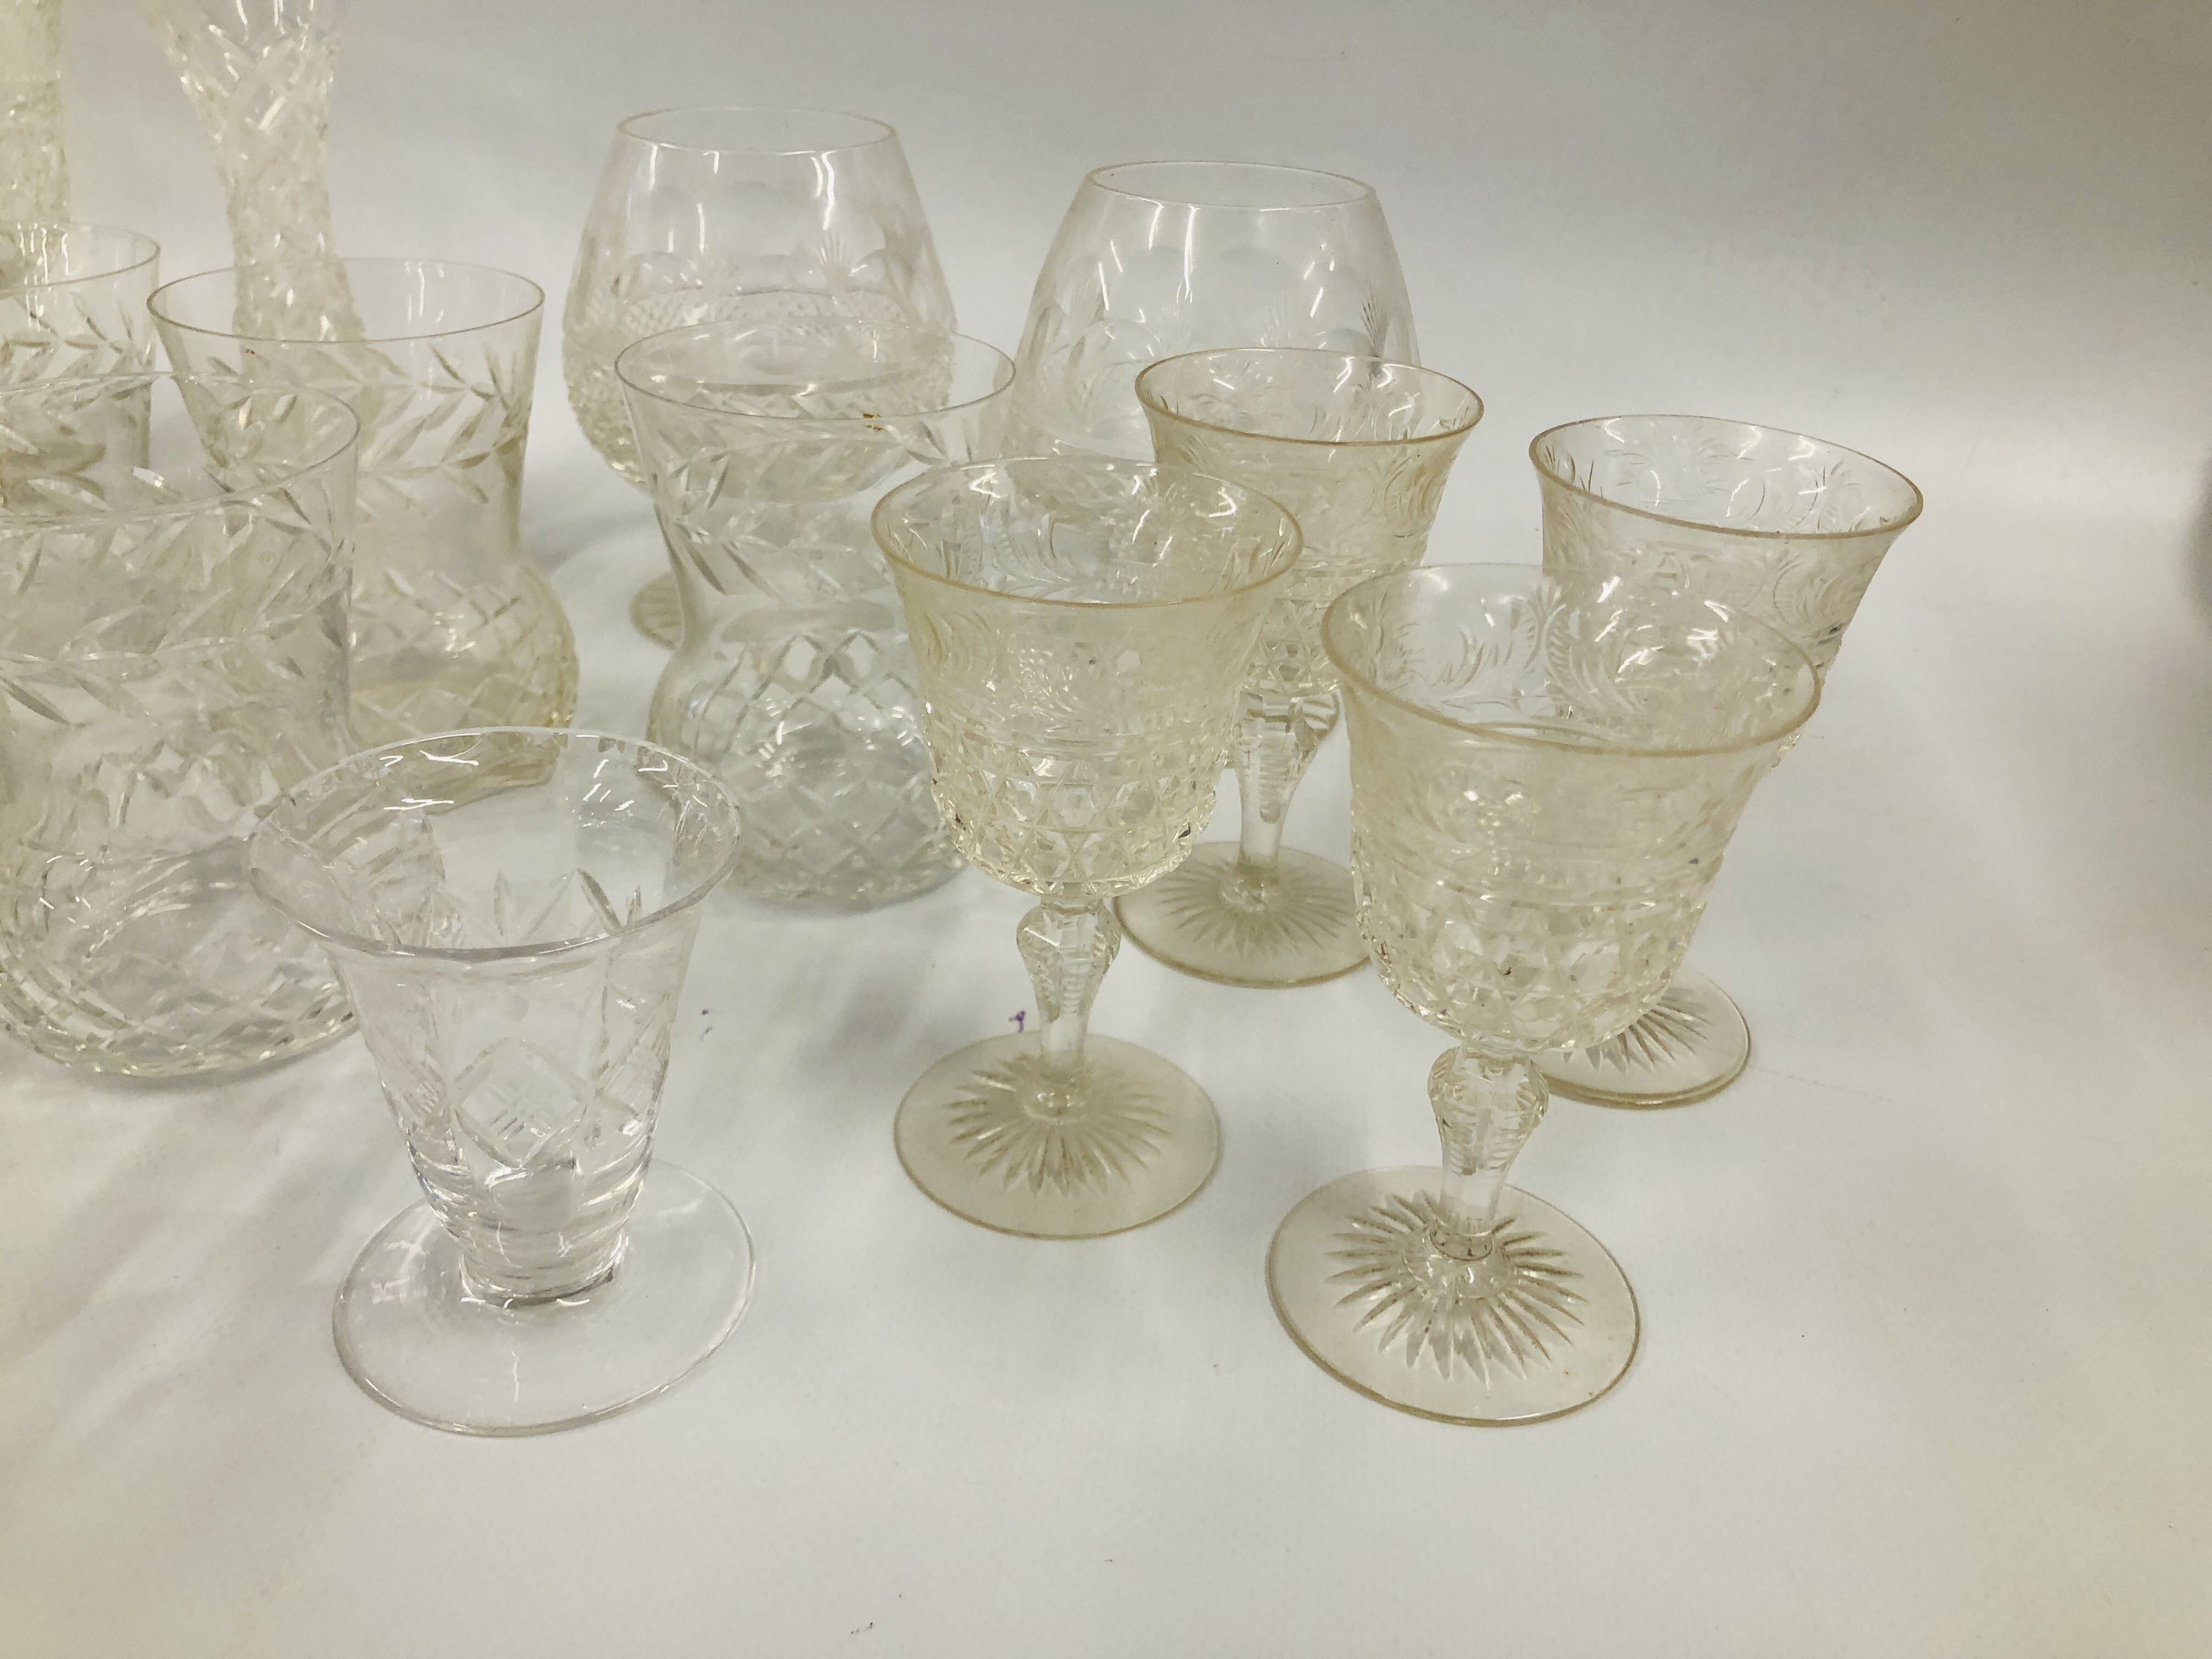 COLLECTION OF GOOD QUALITY ART GLASS CRYSTAL DRINKING GLASSES, VASE, BRANDY GLASSES, ETC. - Image 2 of 6